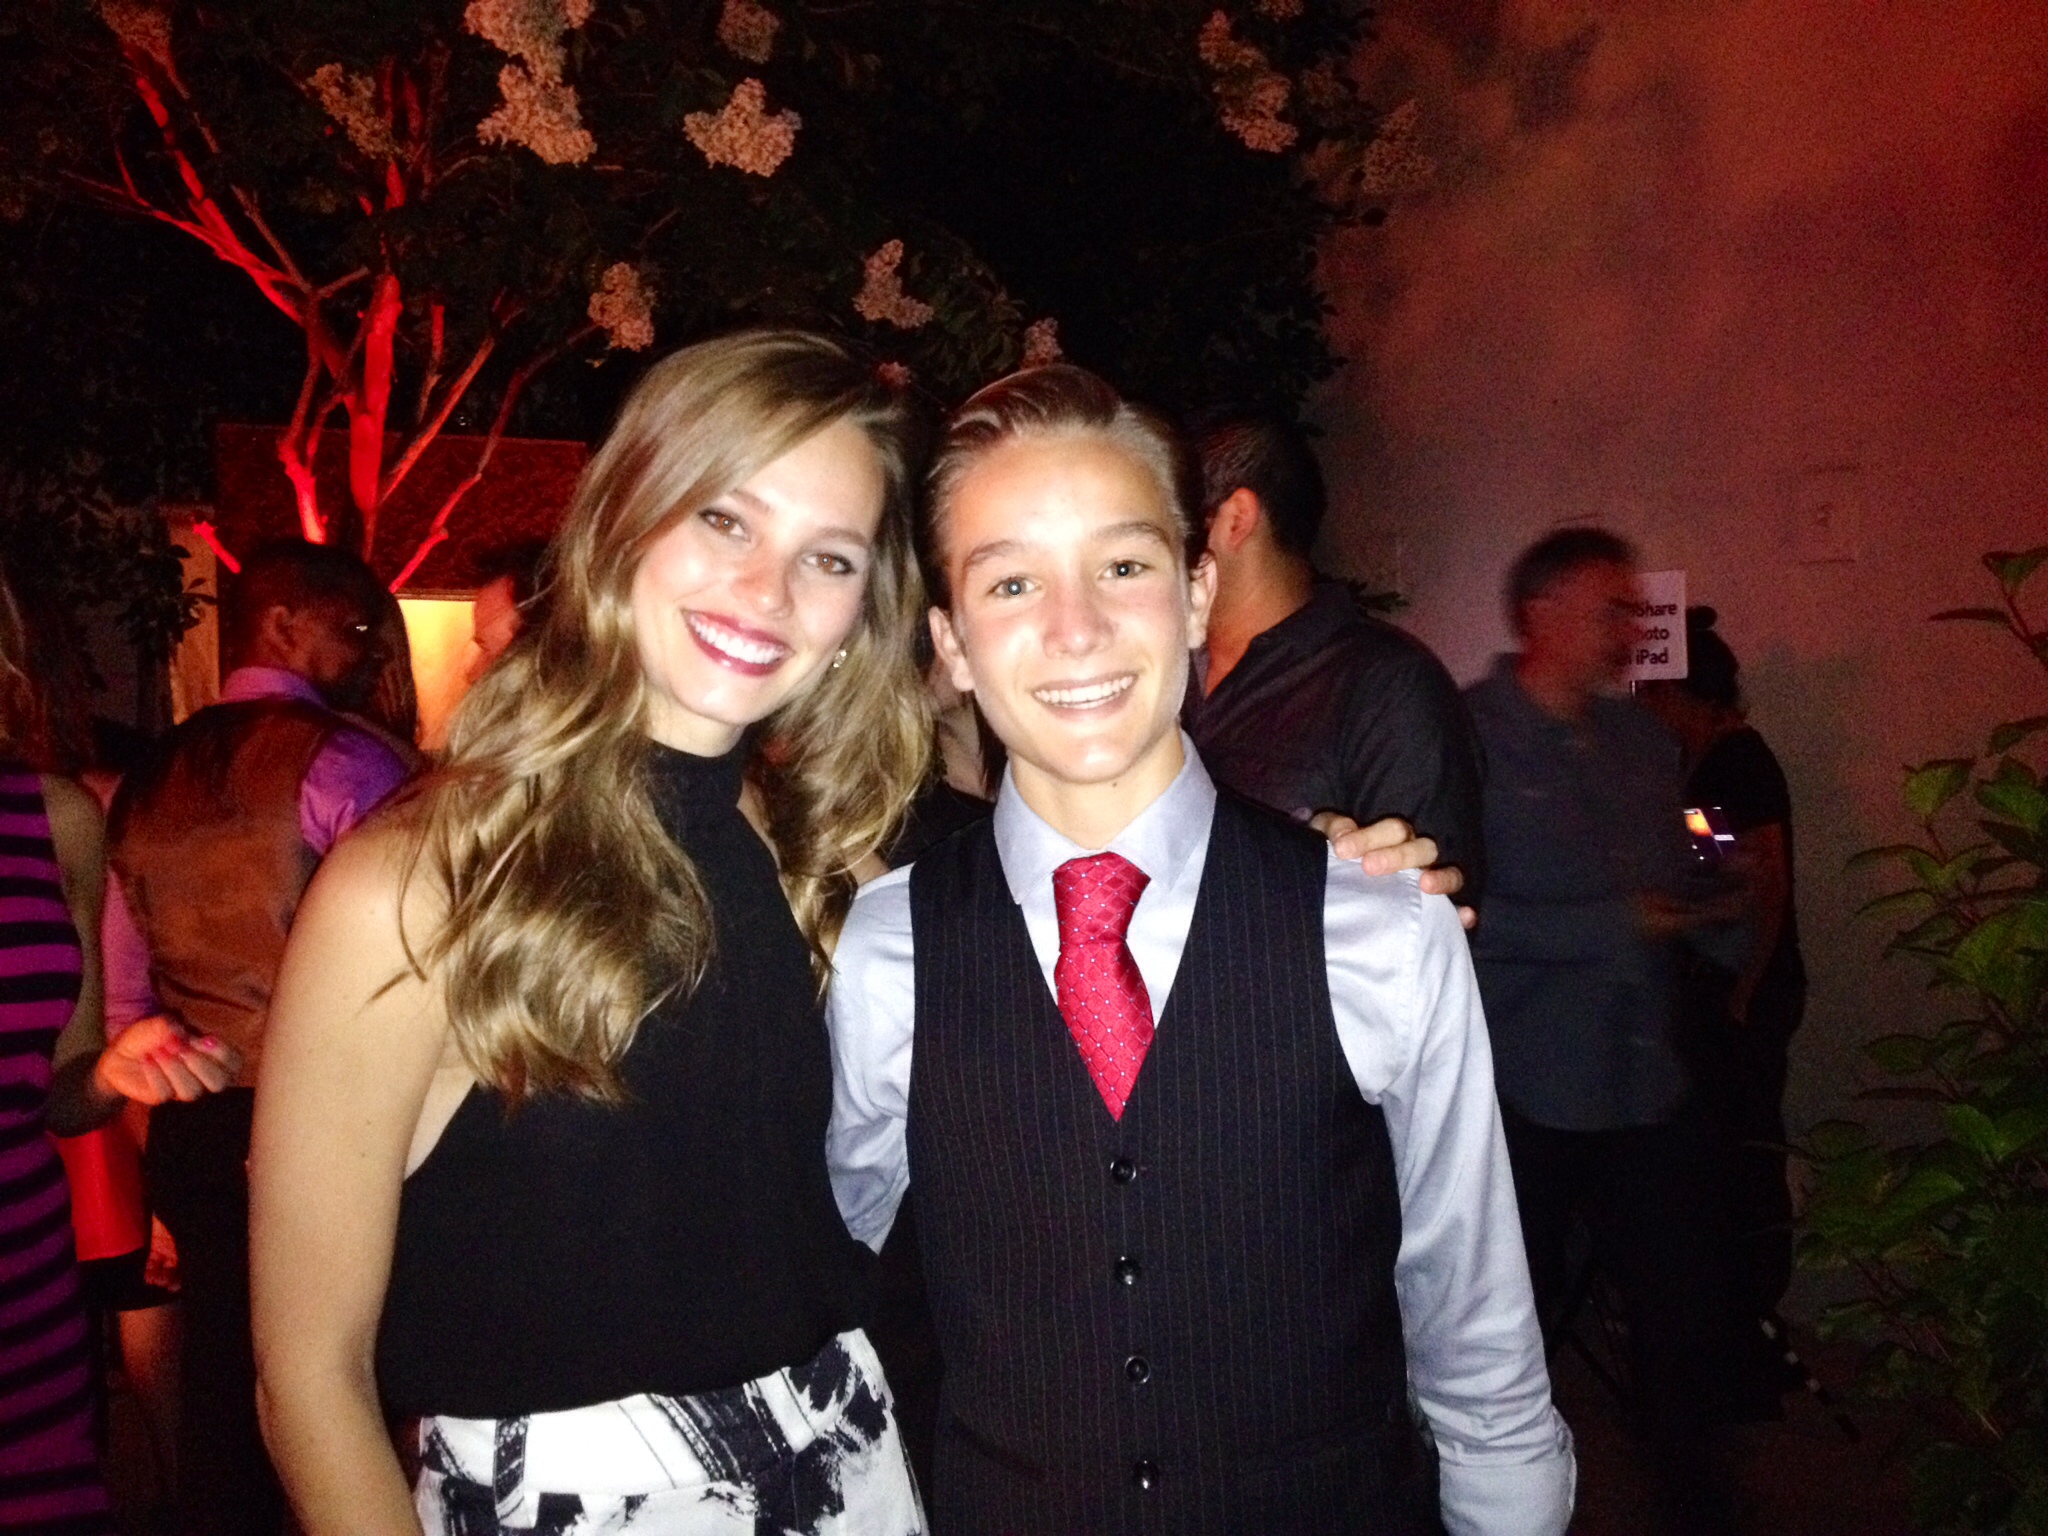 Alec Gray and Bailey Noble at True Blood Series Wrap Party